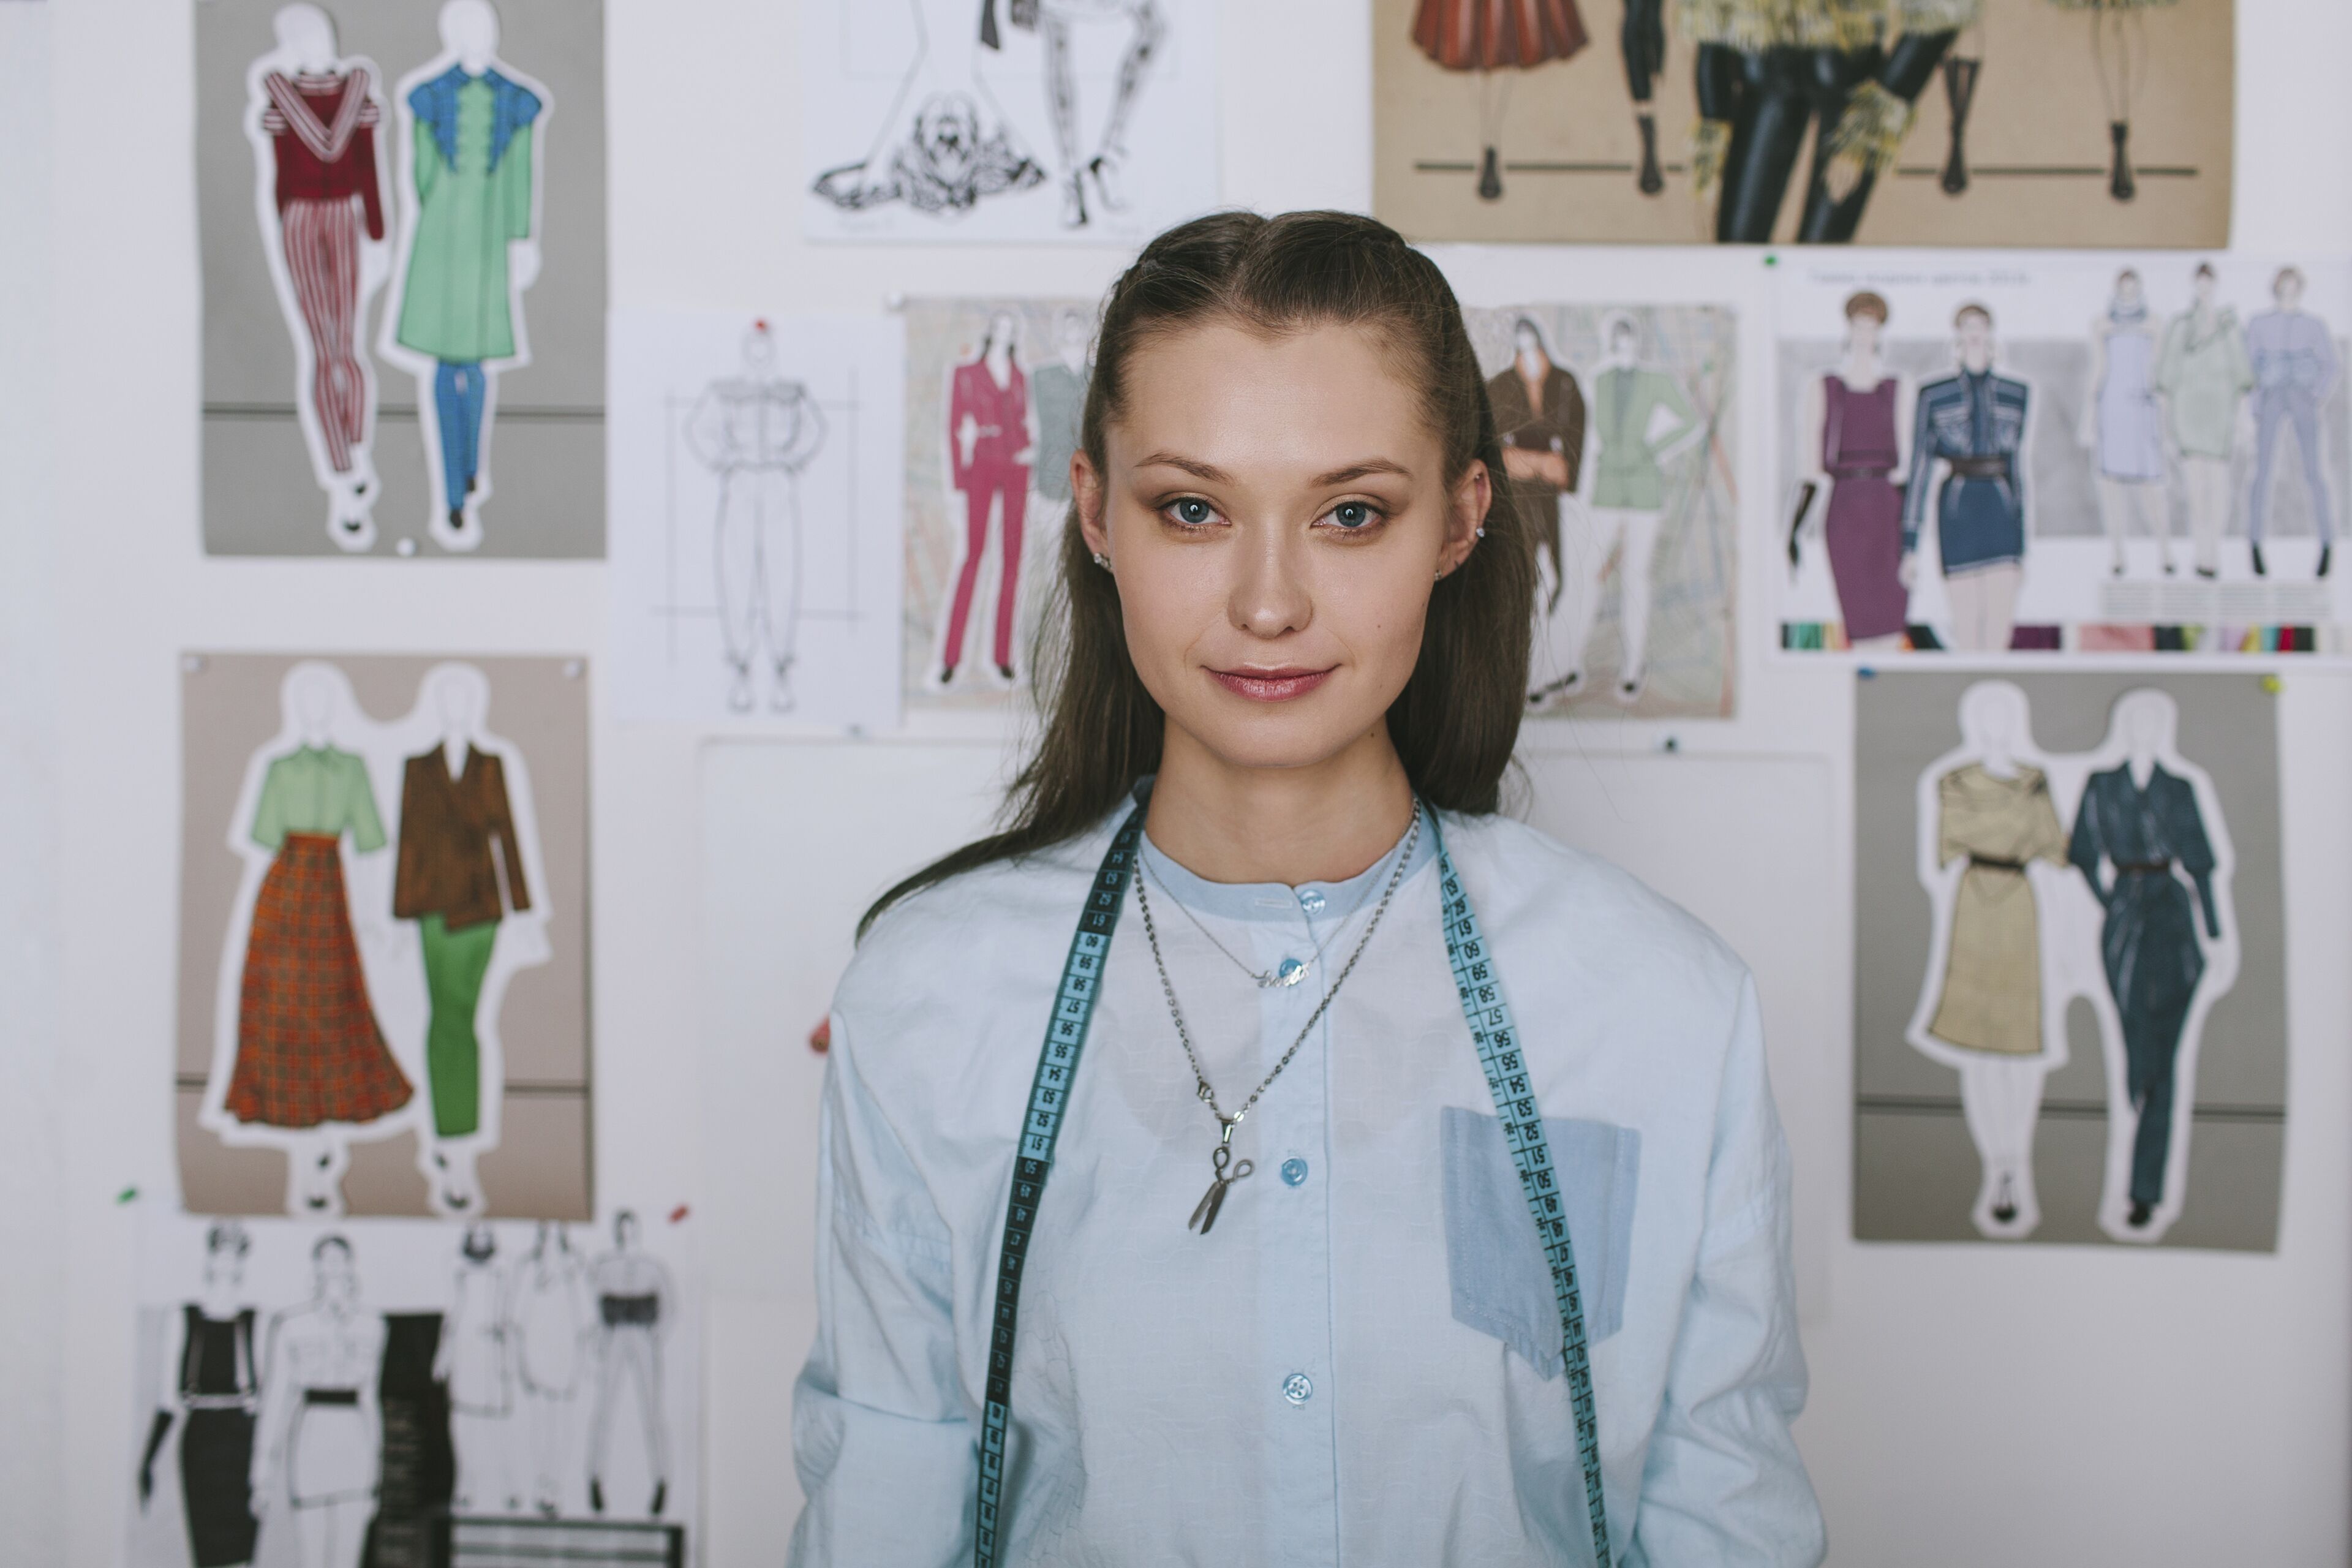 A poised young woman with a measuring tape around her neck stands in front of a fashion design mood board.